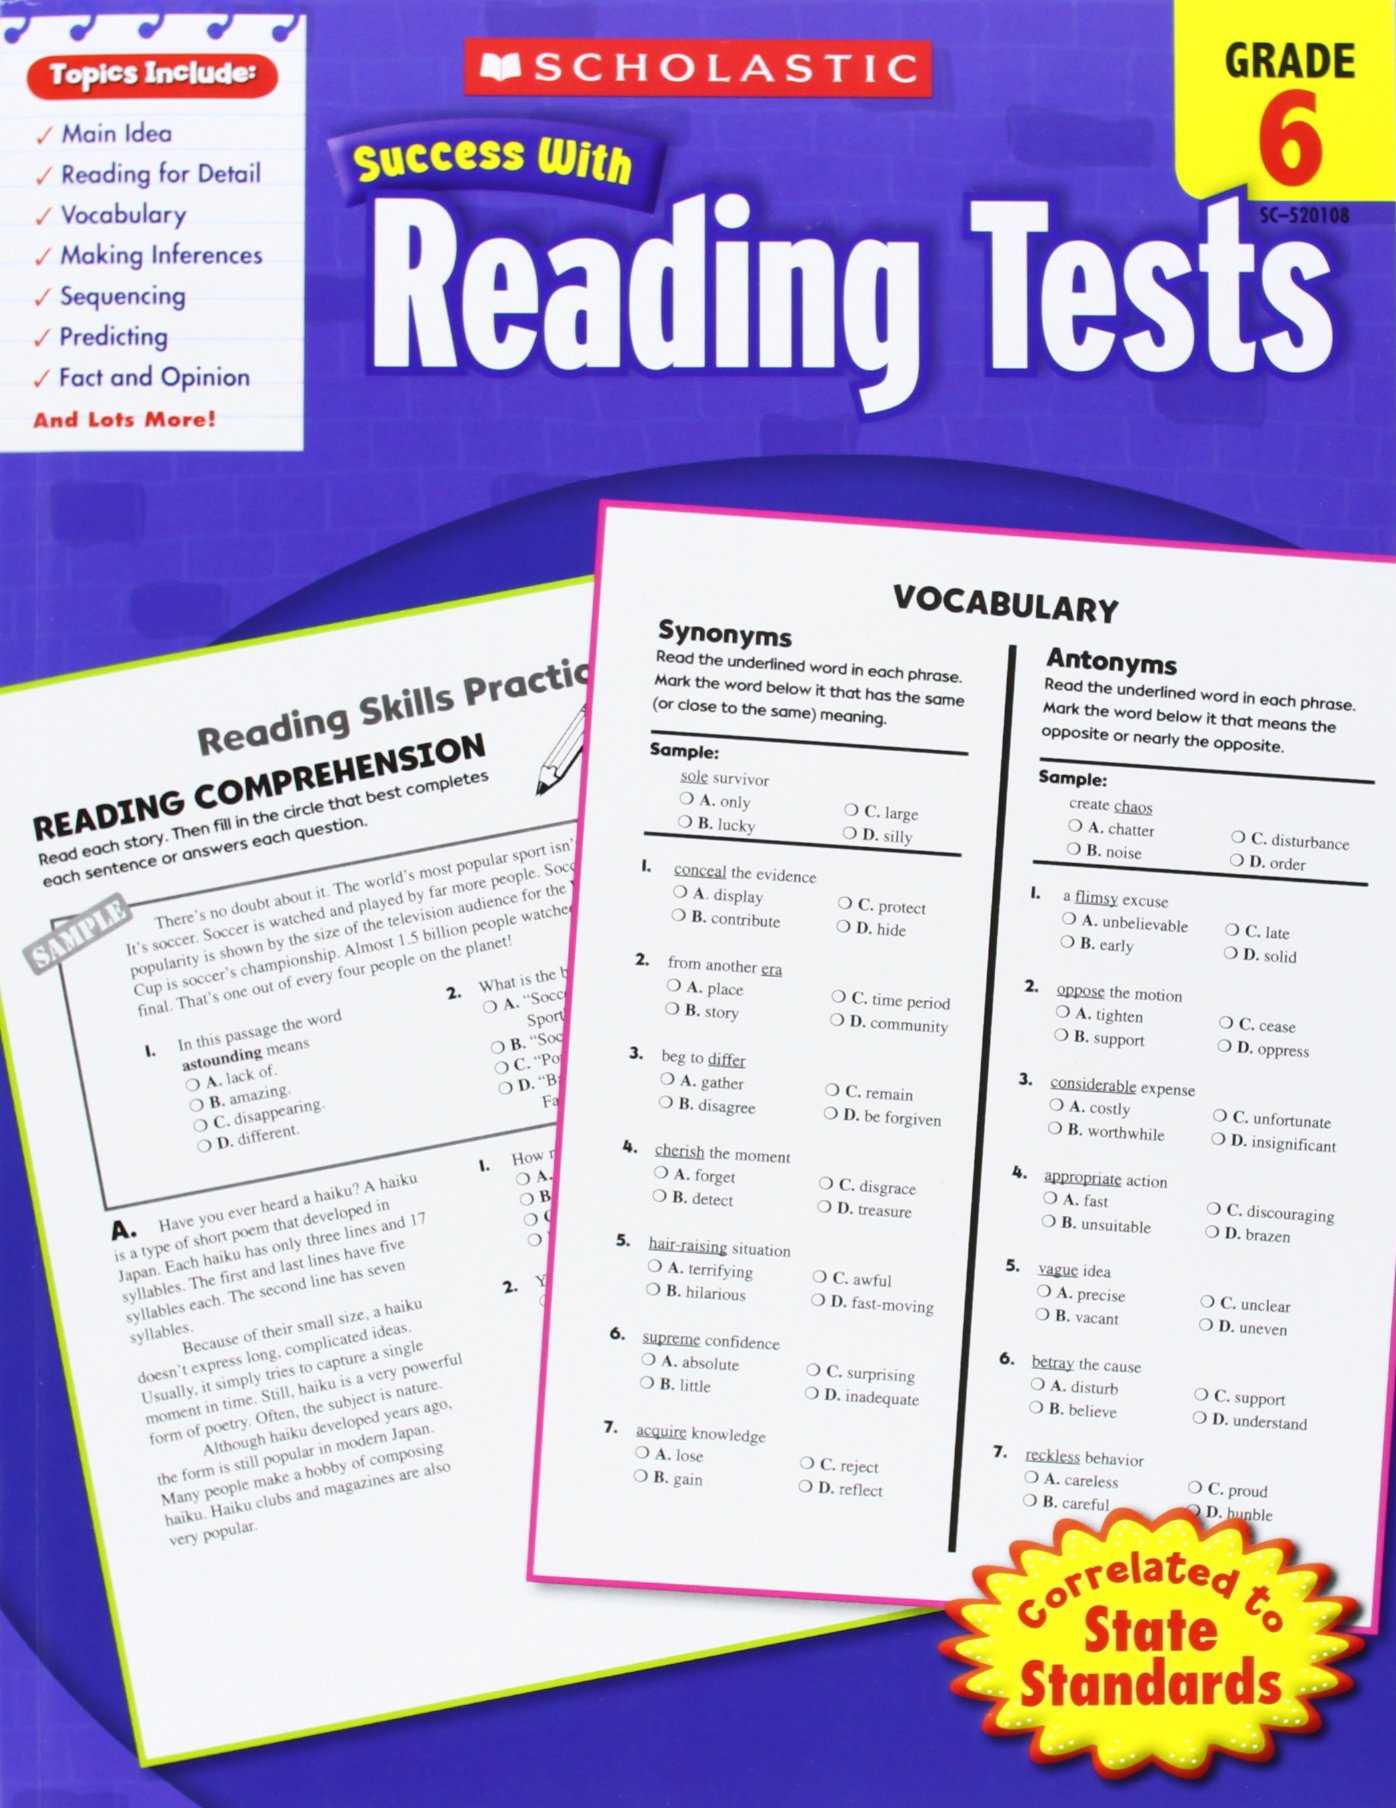 Self Esteem Worksheets Pdf and Amazon Scholastic Success with Reading Tests Grade 6